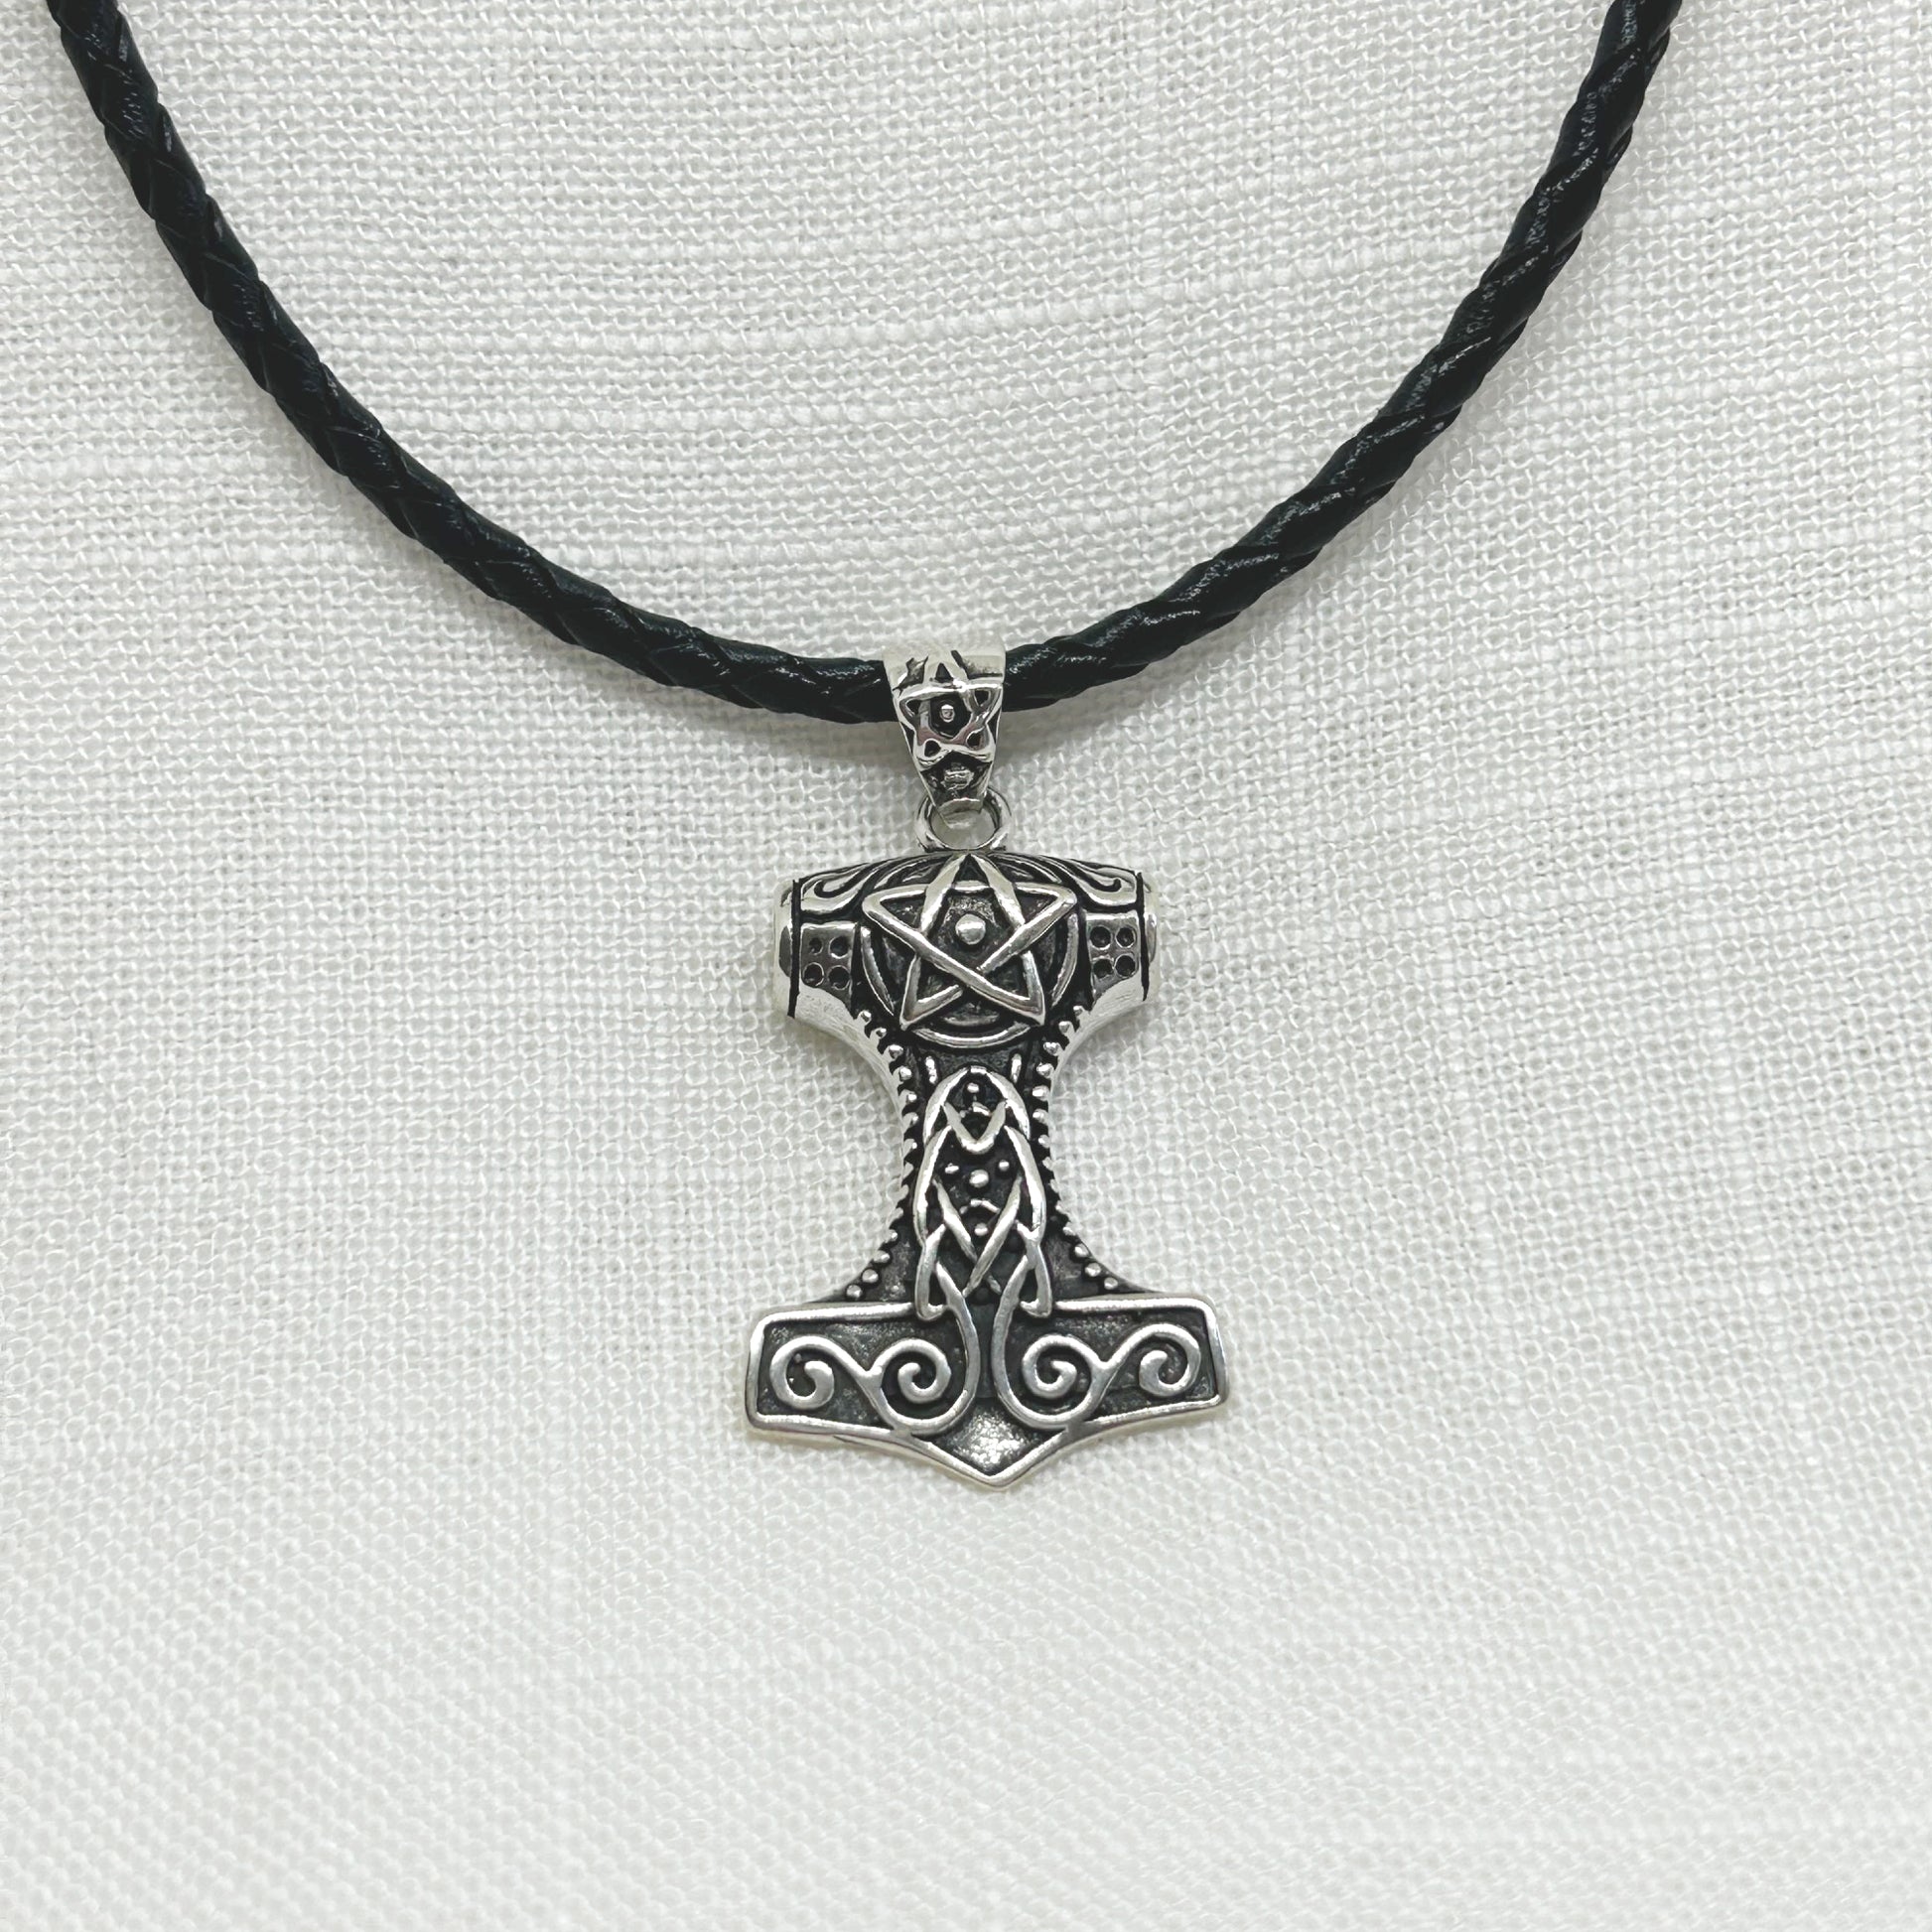 Beautifully detailed and slightly oxidized to enhance the knot work, swirls and pentagram, this Thor's Mjolnir is set in .925 silver. The Mjolnir is a Viking amulet of protection and power. The size is 4.5cm including the pentagram patterned bale x 2.4cm wide. This pendant comes on an 18" plaited cylindrical leather cord necklace with sterling silver fittings. The weight including cord is 10g/0.35oz. All jewellery comes gift boxed.